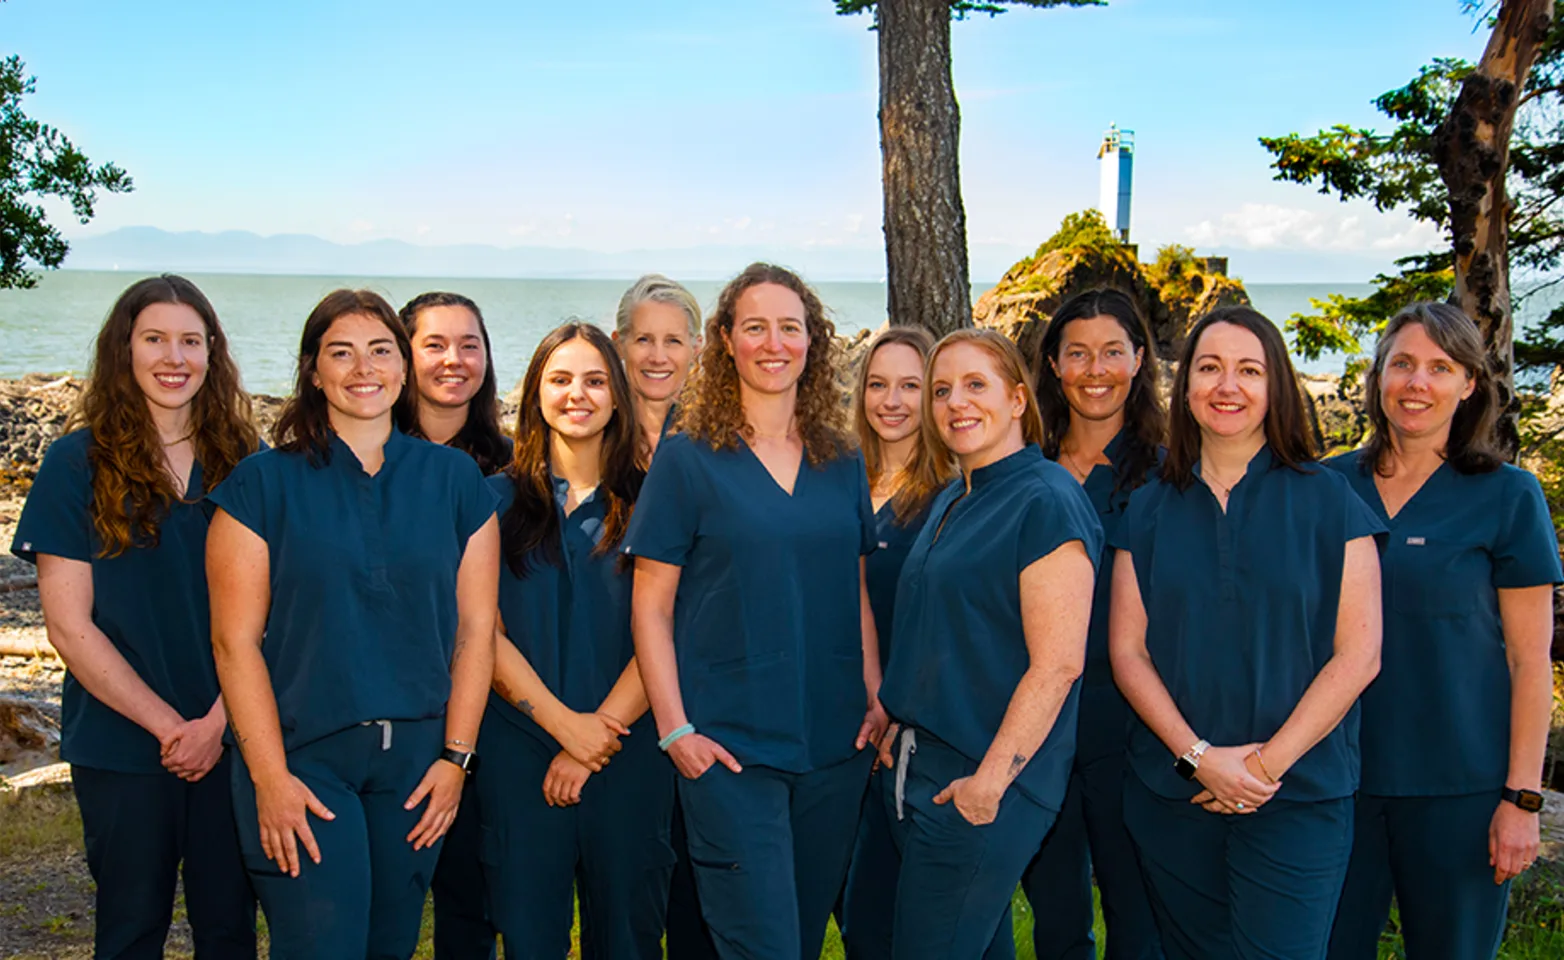 The Bowen Veterinary Services team